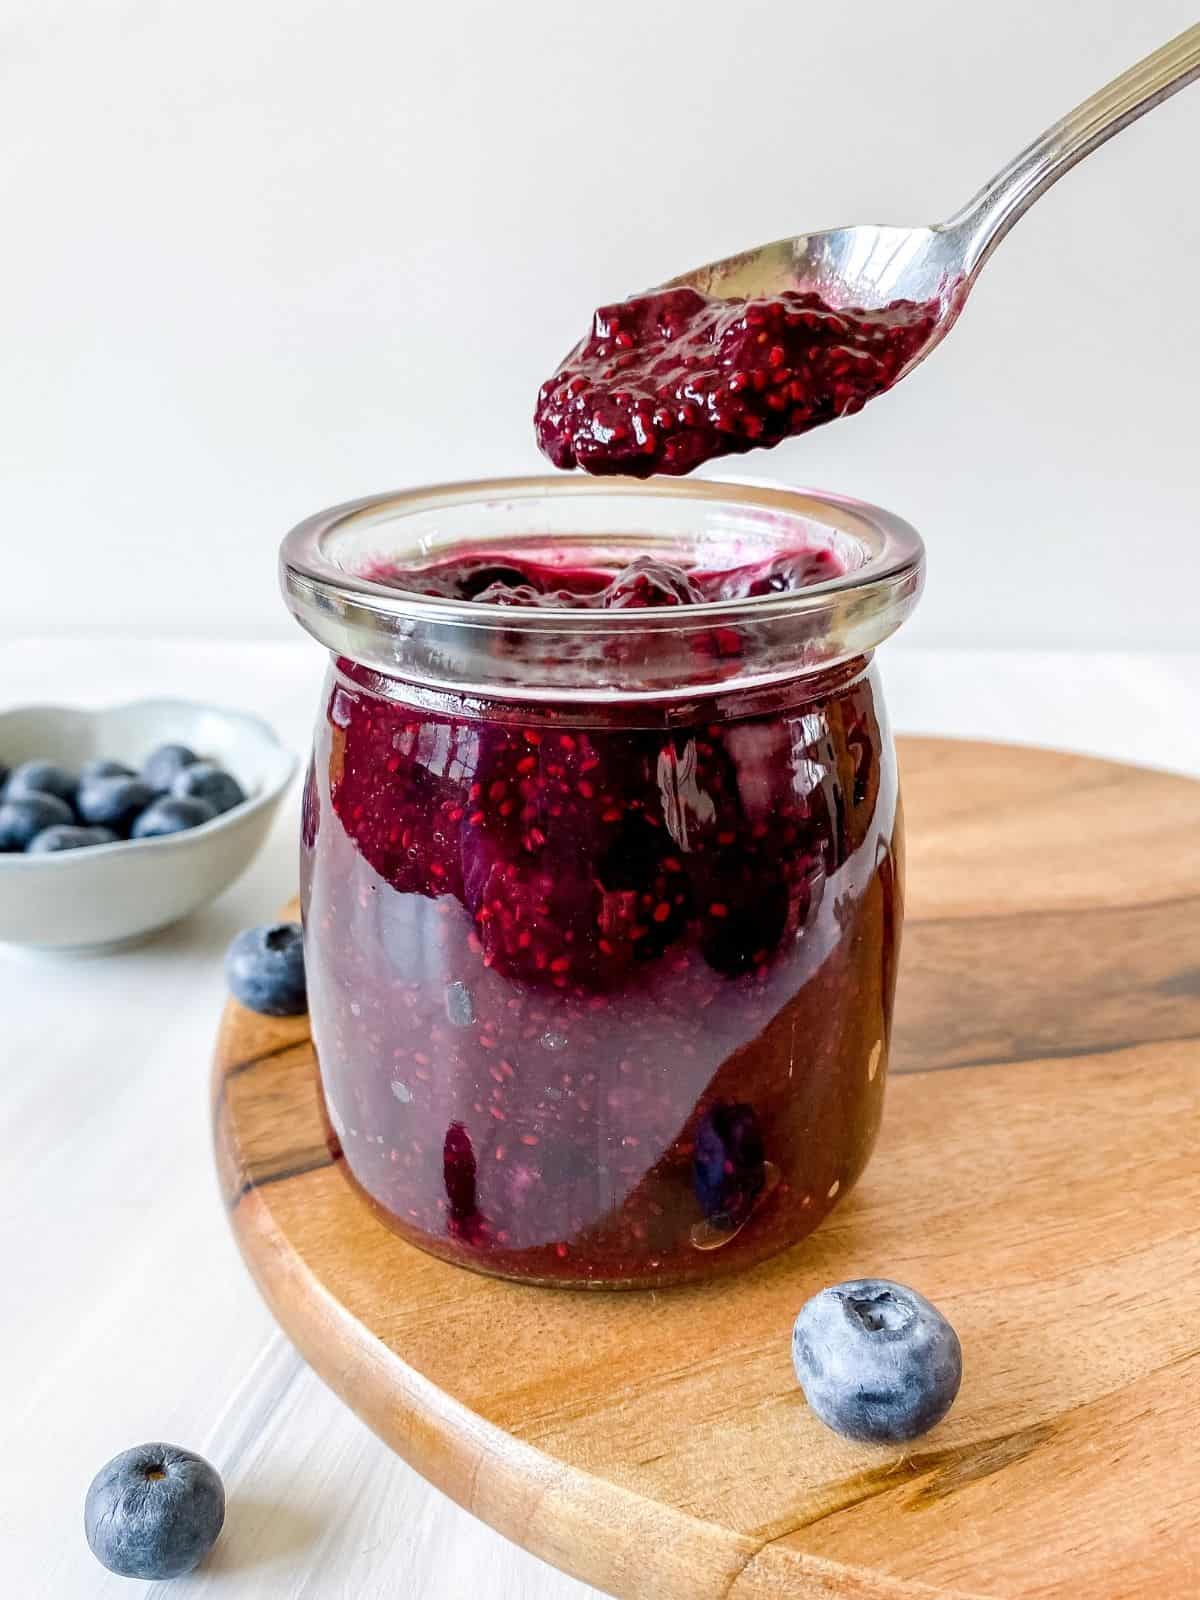 blueberry chia jam in a glass jar on a wooden board with a spoon scooping jam out of it.